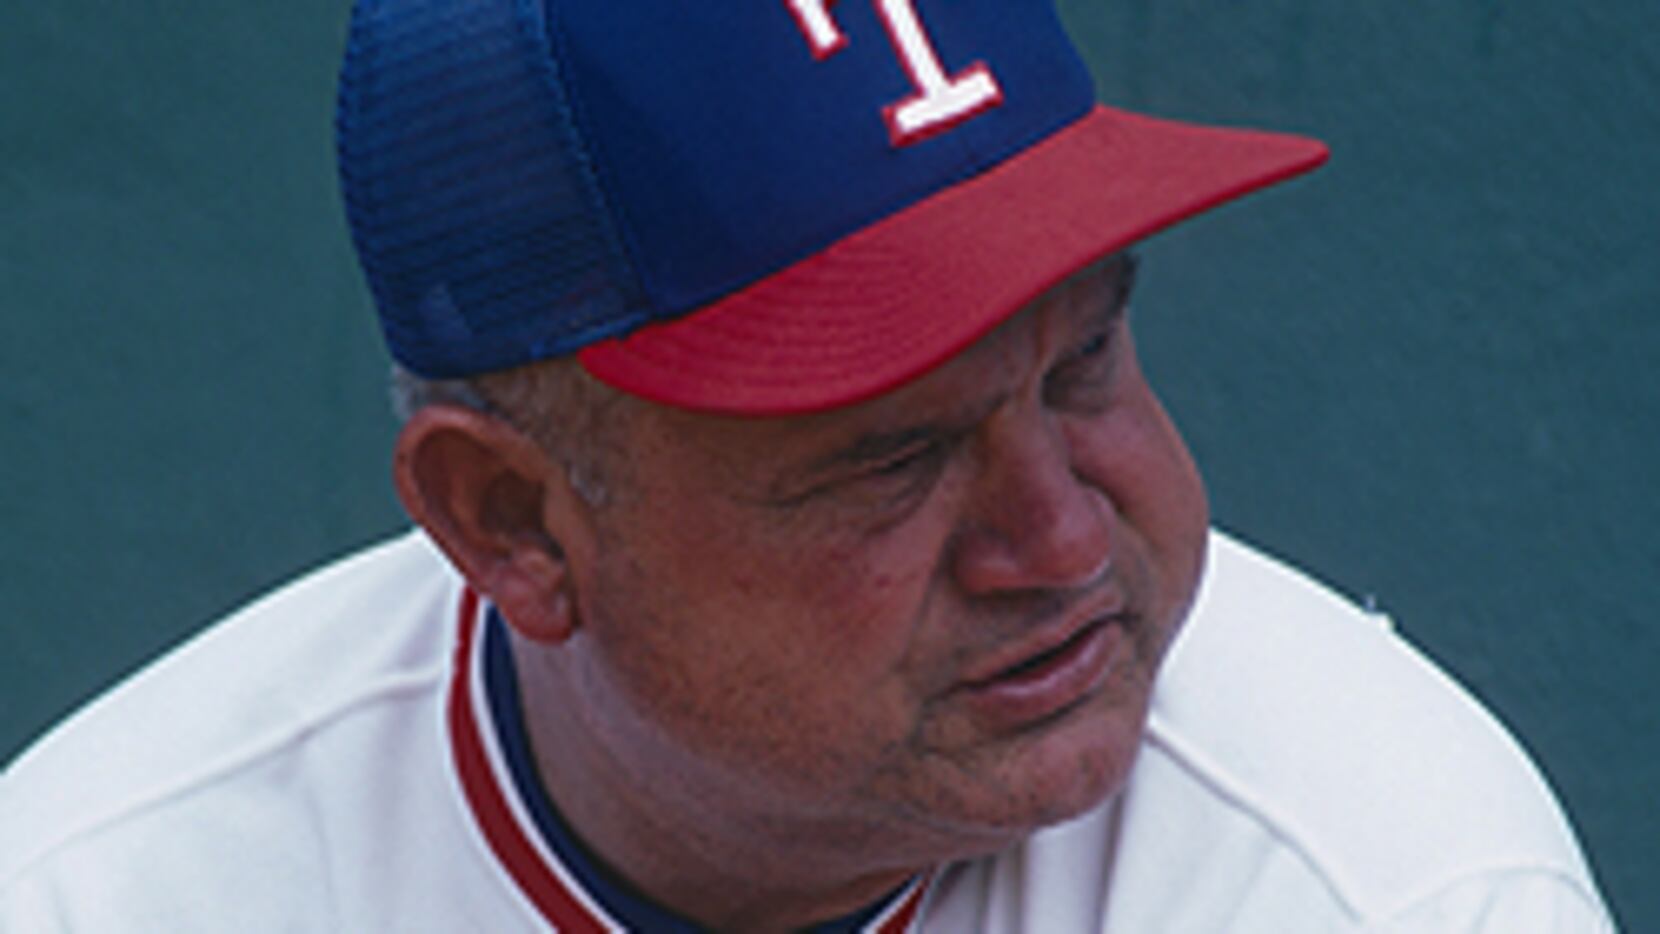 Don Zimmer, who spent 66 years in professional baseball, dies at